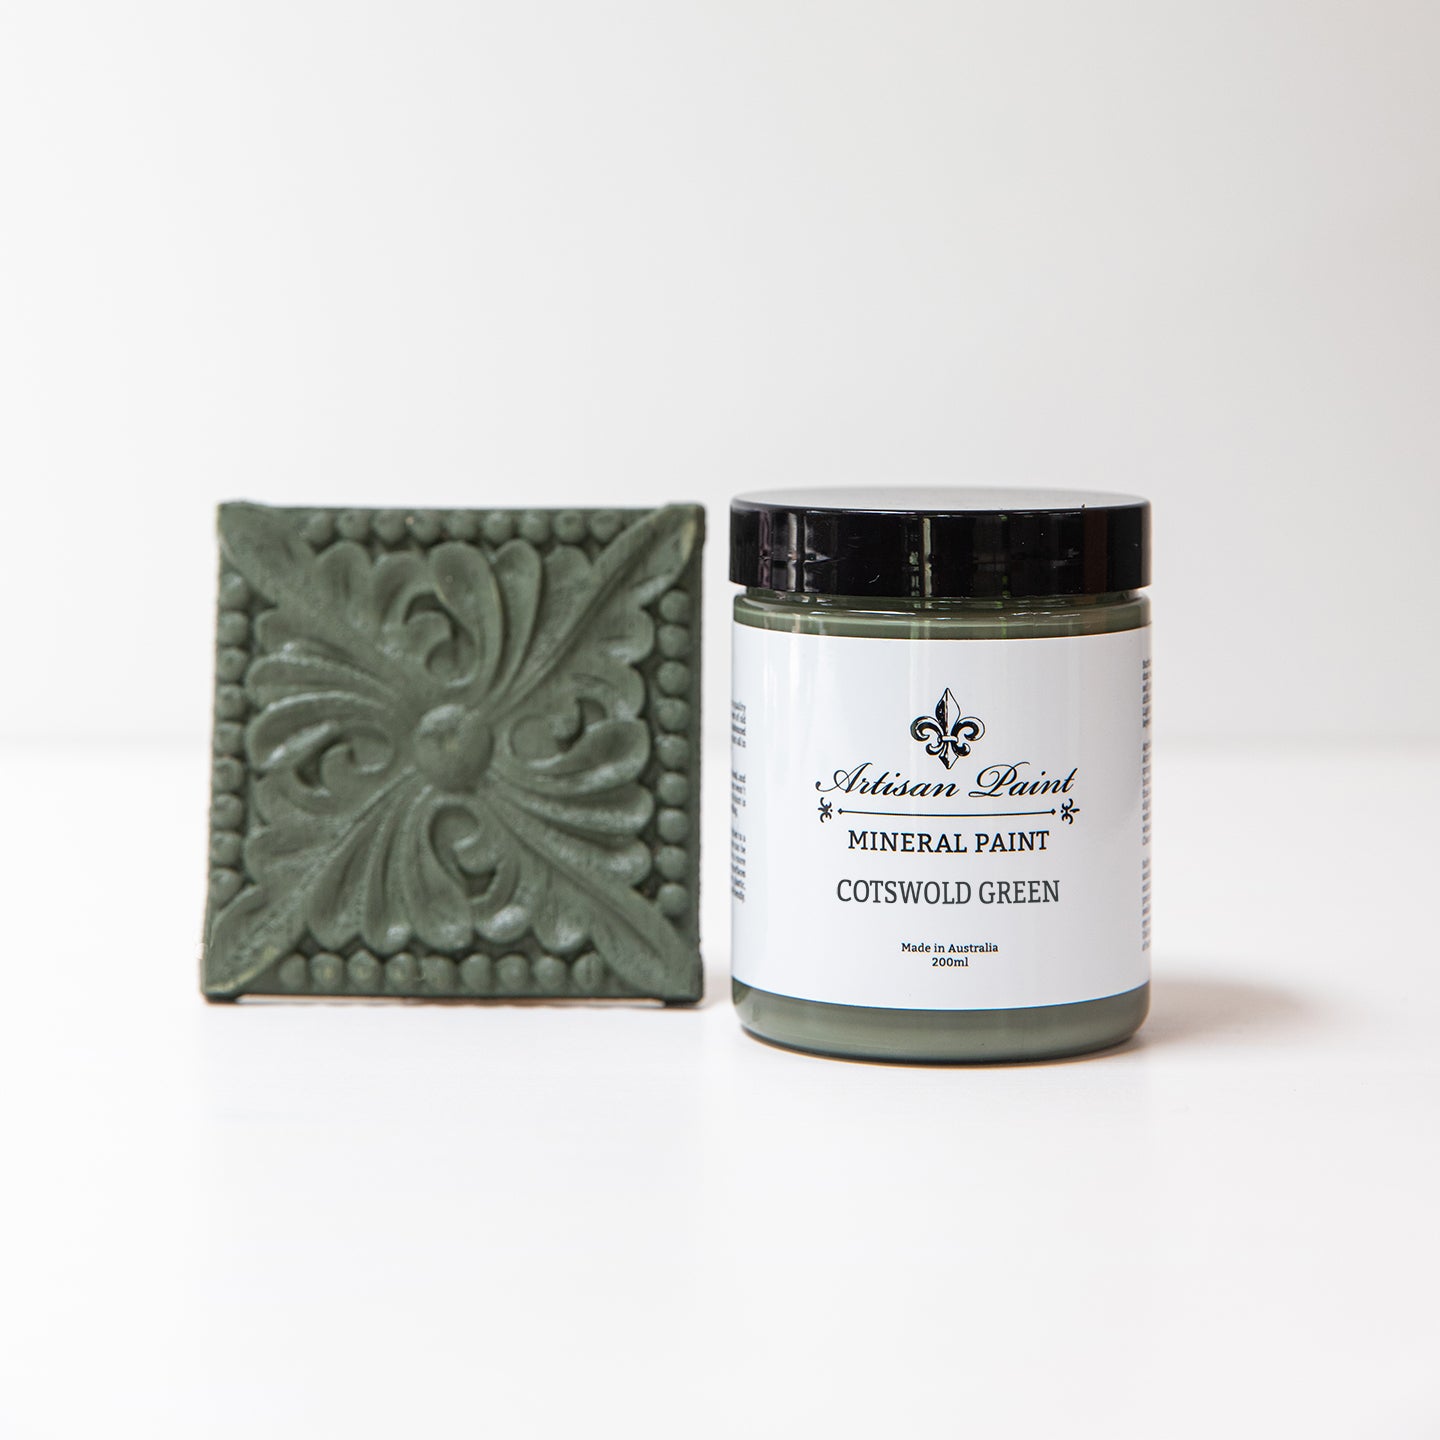 Artisan Cotswold Green Mineral Paint